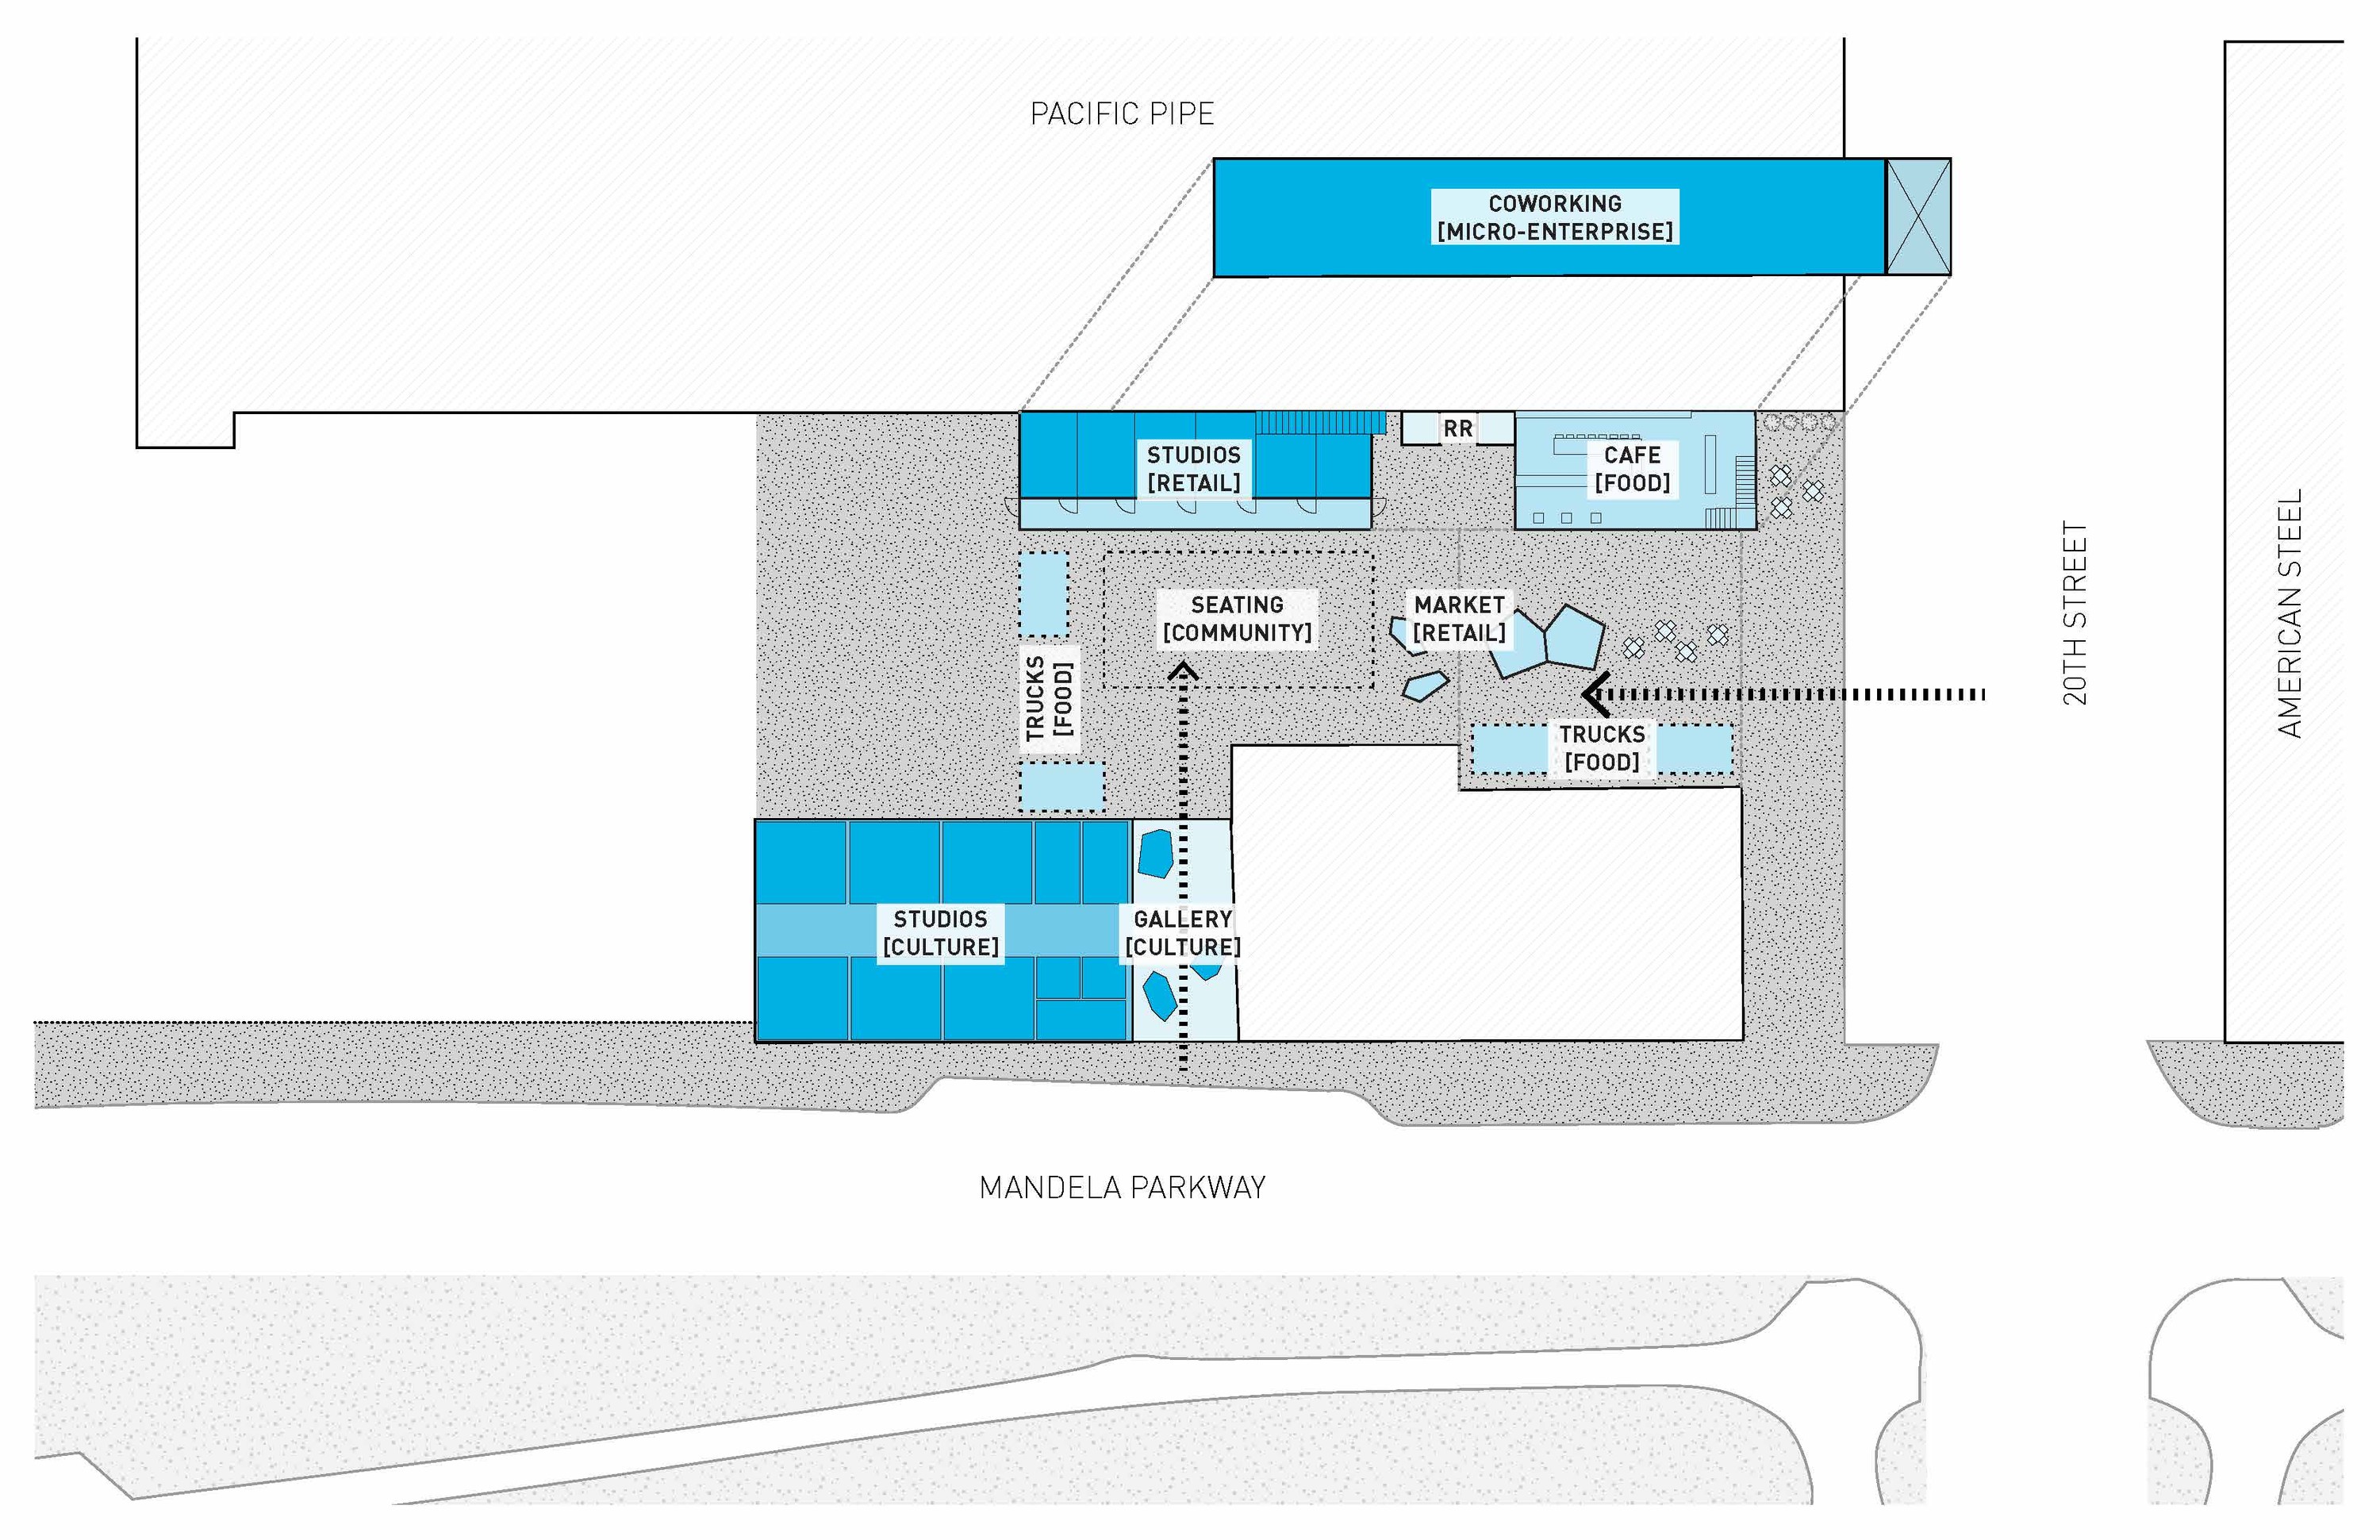 phase 1 plan: cafes, studios, restrooms, offices, coworking